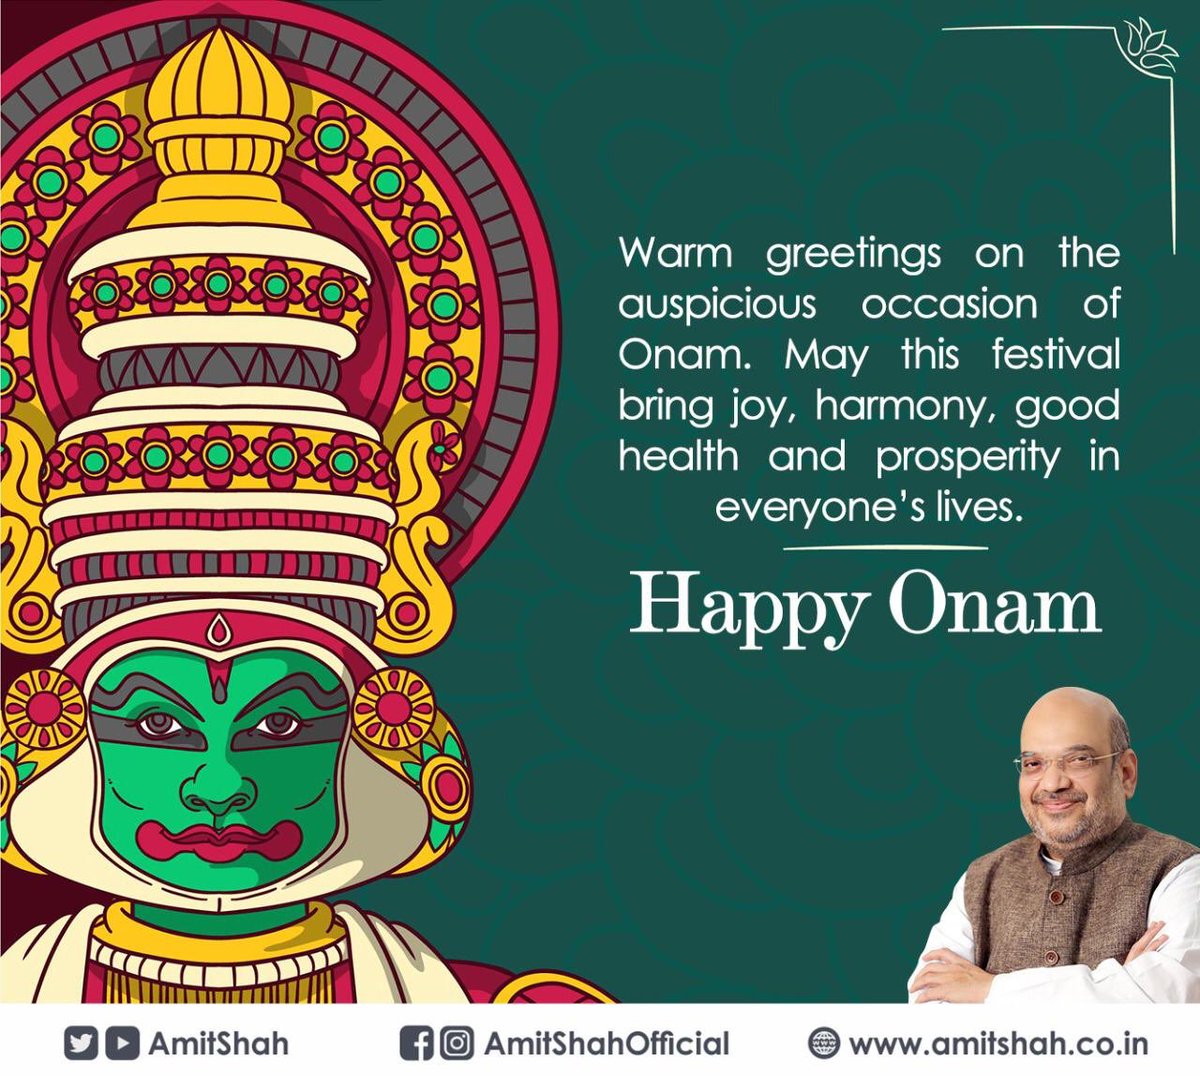 Warm greetings on the auspicious occasion of Onam. May this festival bring joy, harmony, good health and prosperity in everyone’s lives.

Happy Onam!